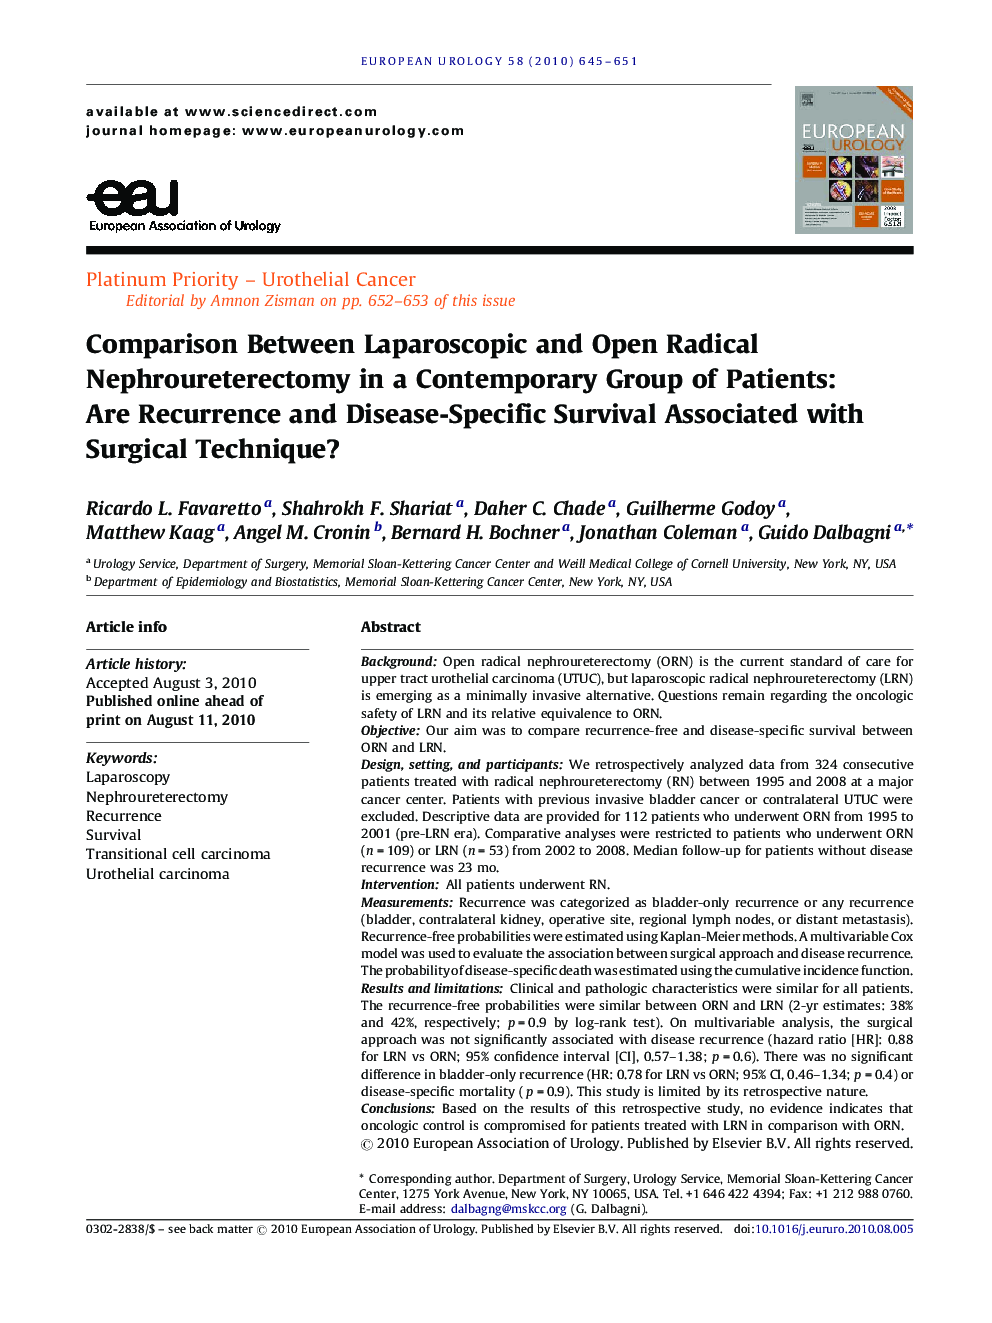 Comparison Between Laparoscopic and Open Radical Nephroureterectomy in a Contemporary Group of Patients: Are Recurrence and Disease-Specific Survival Associated with Surgical Technique?